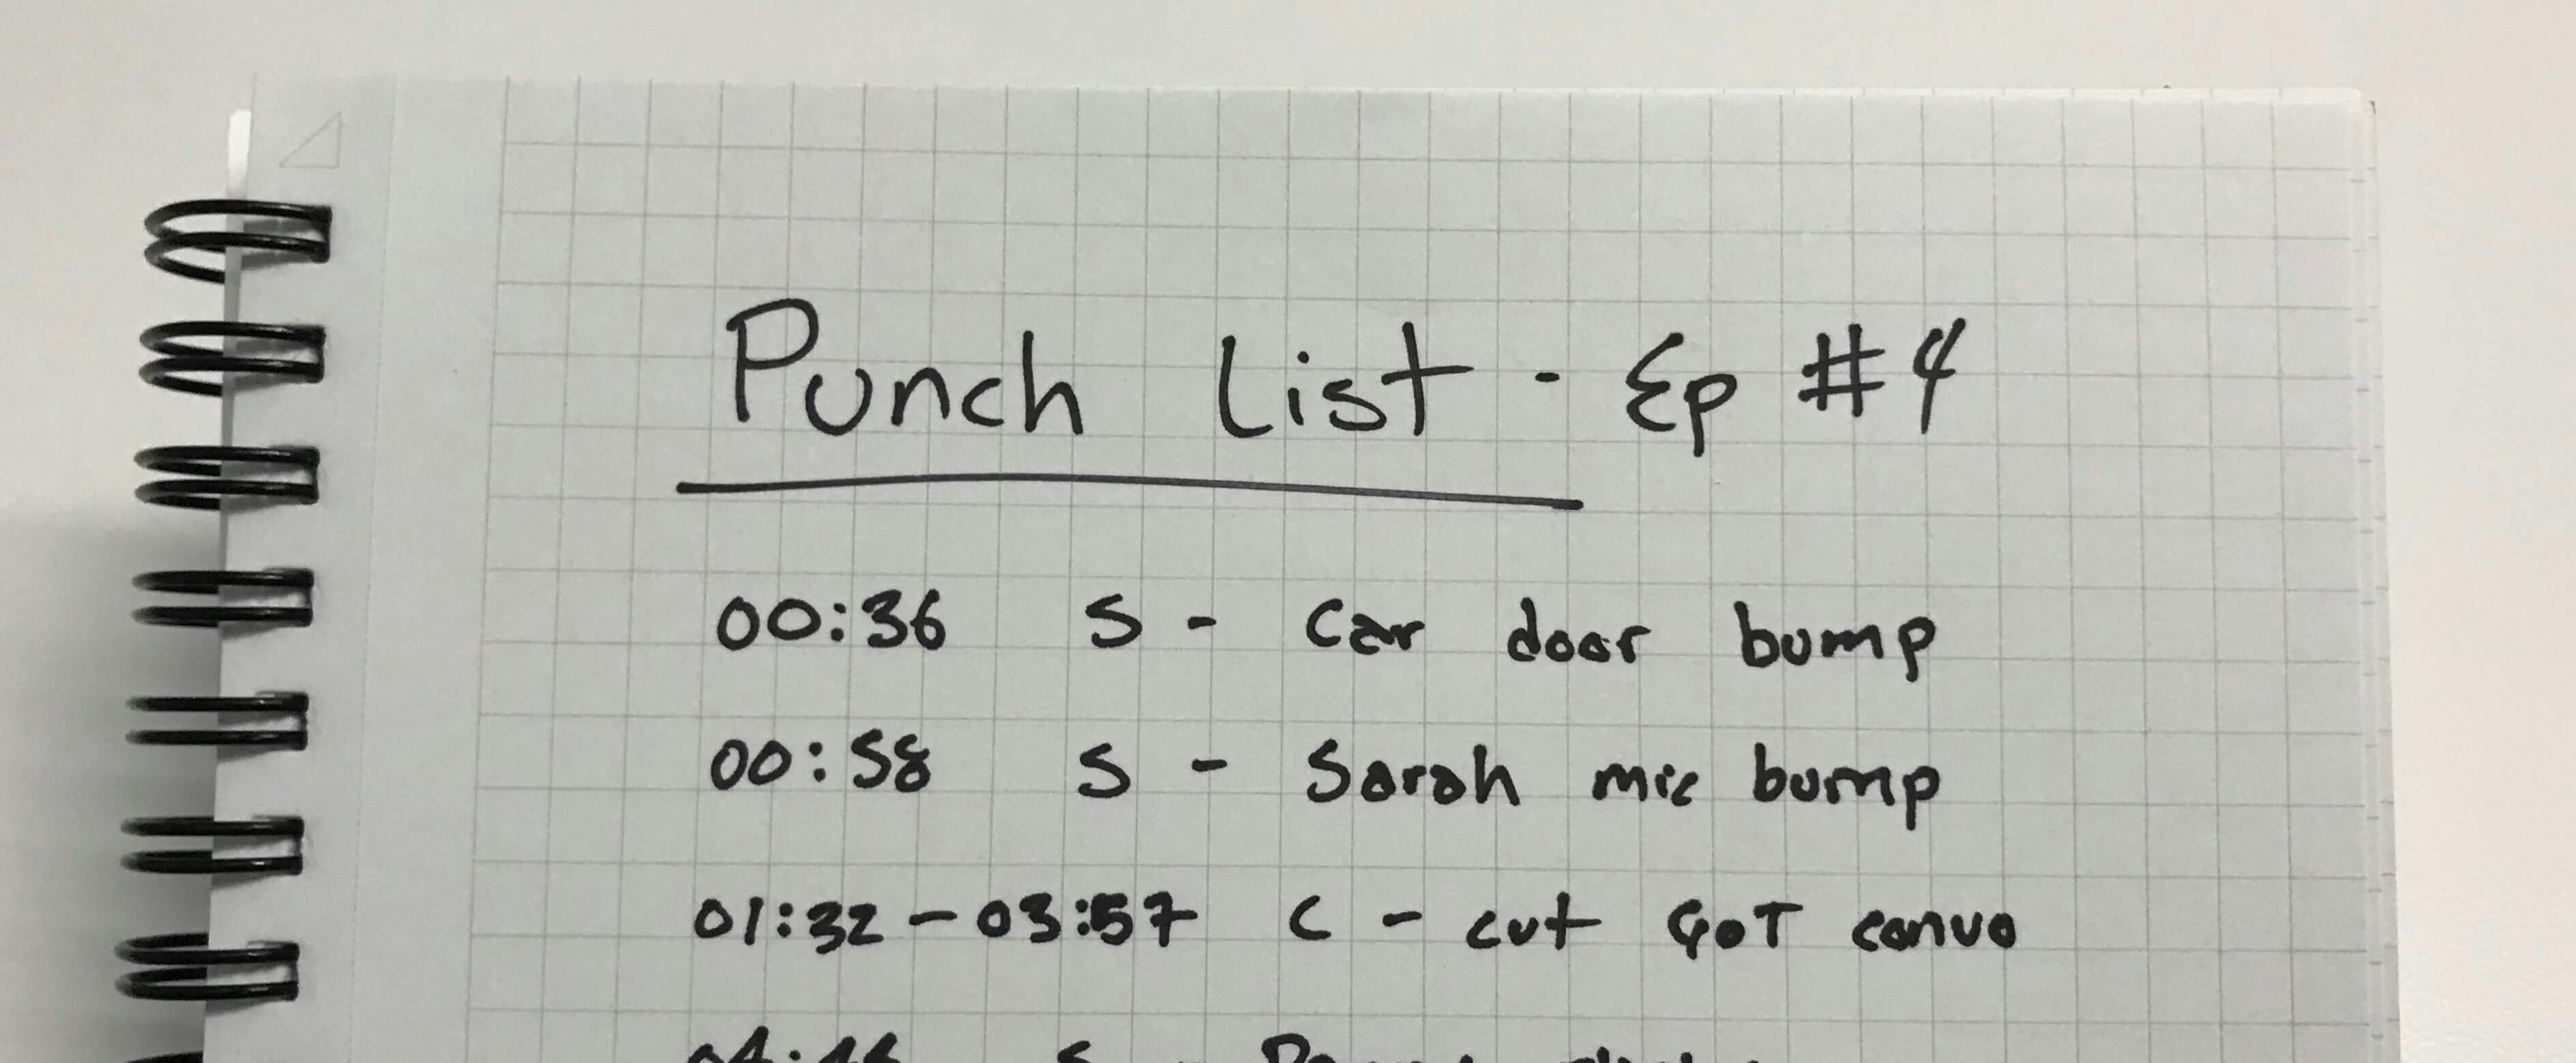 Podcast editing punch list